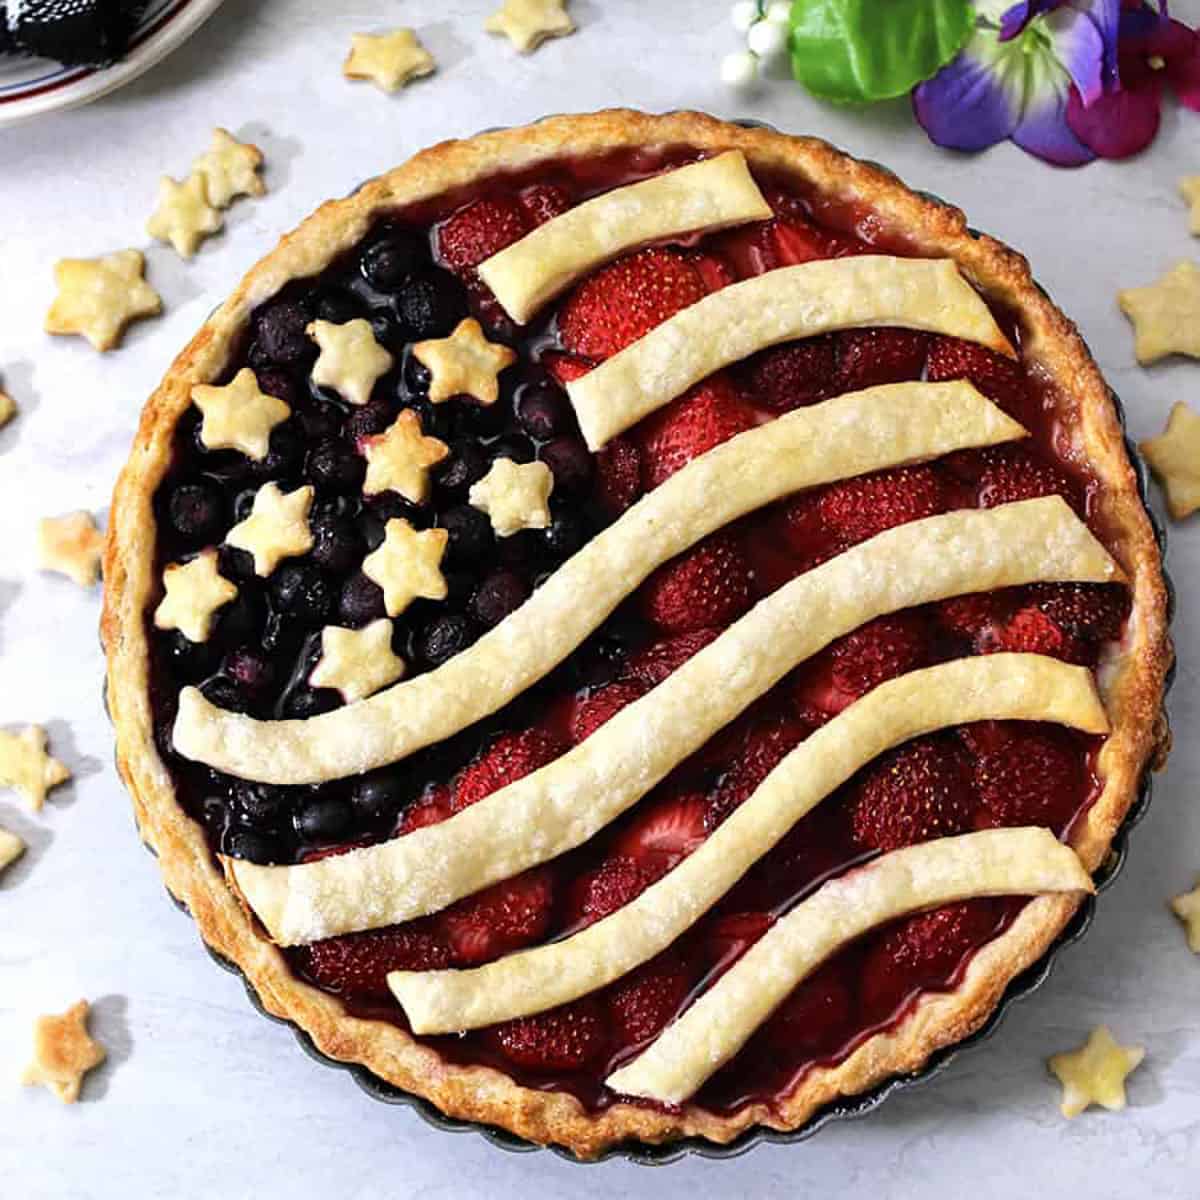 Mixed berry pie or American flag pie with stars and stripes.